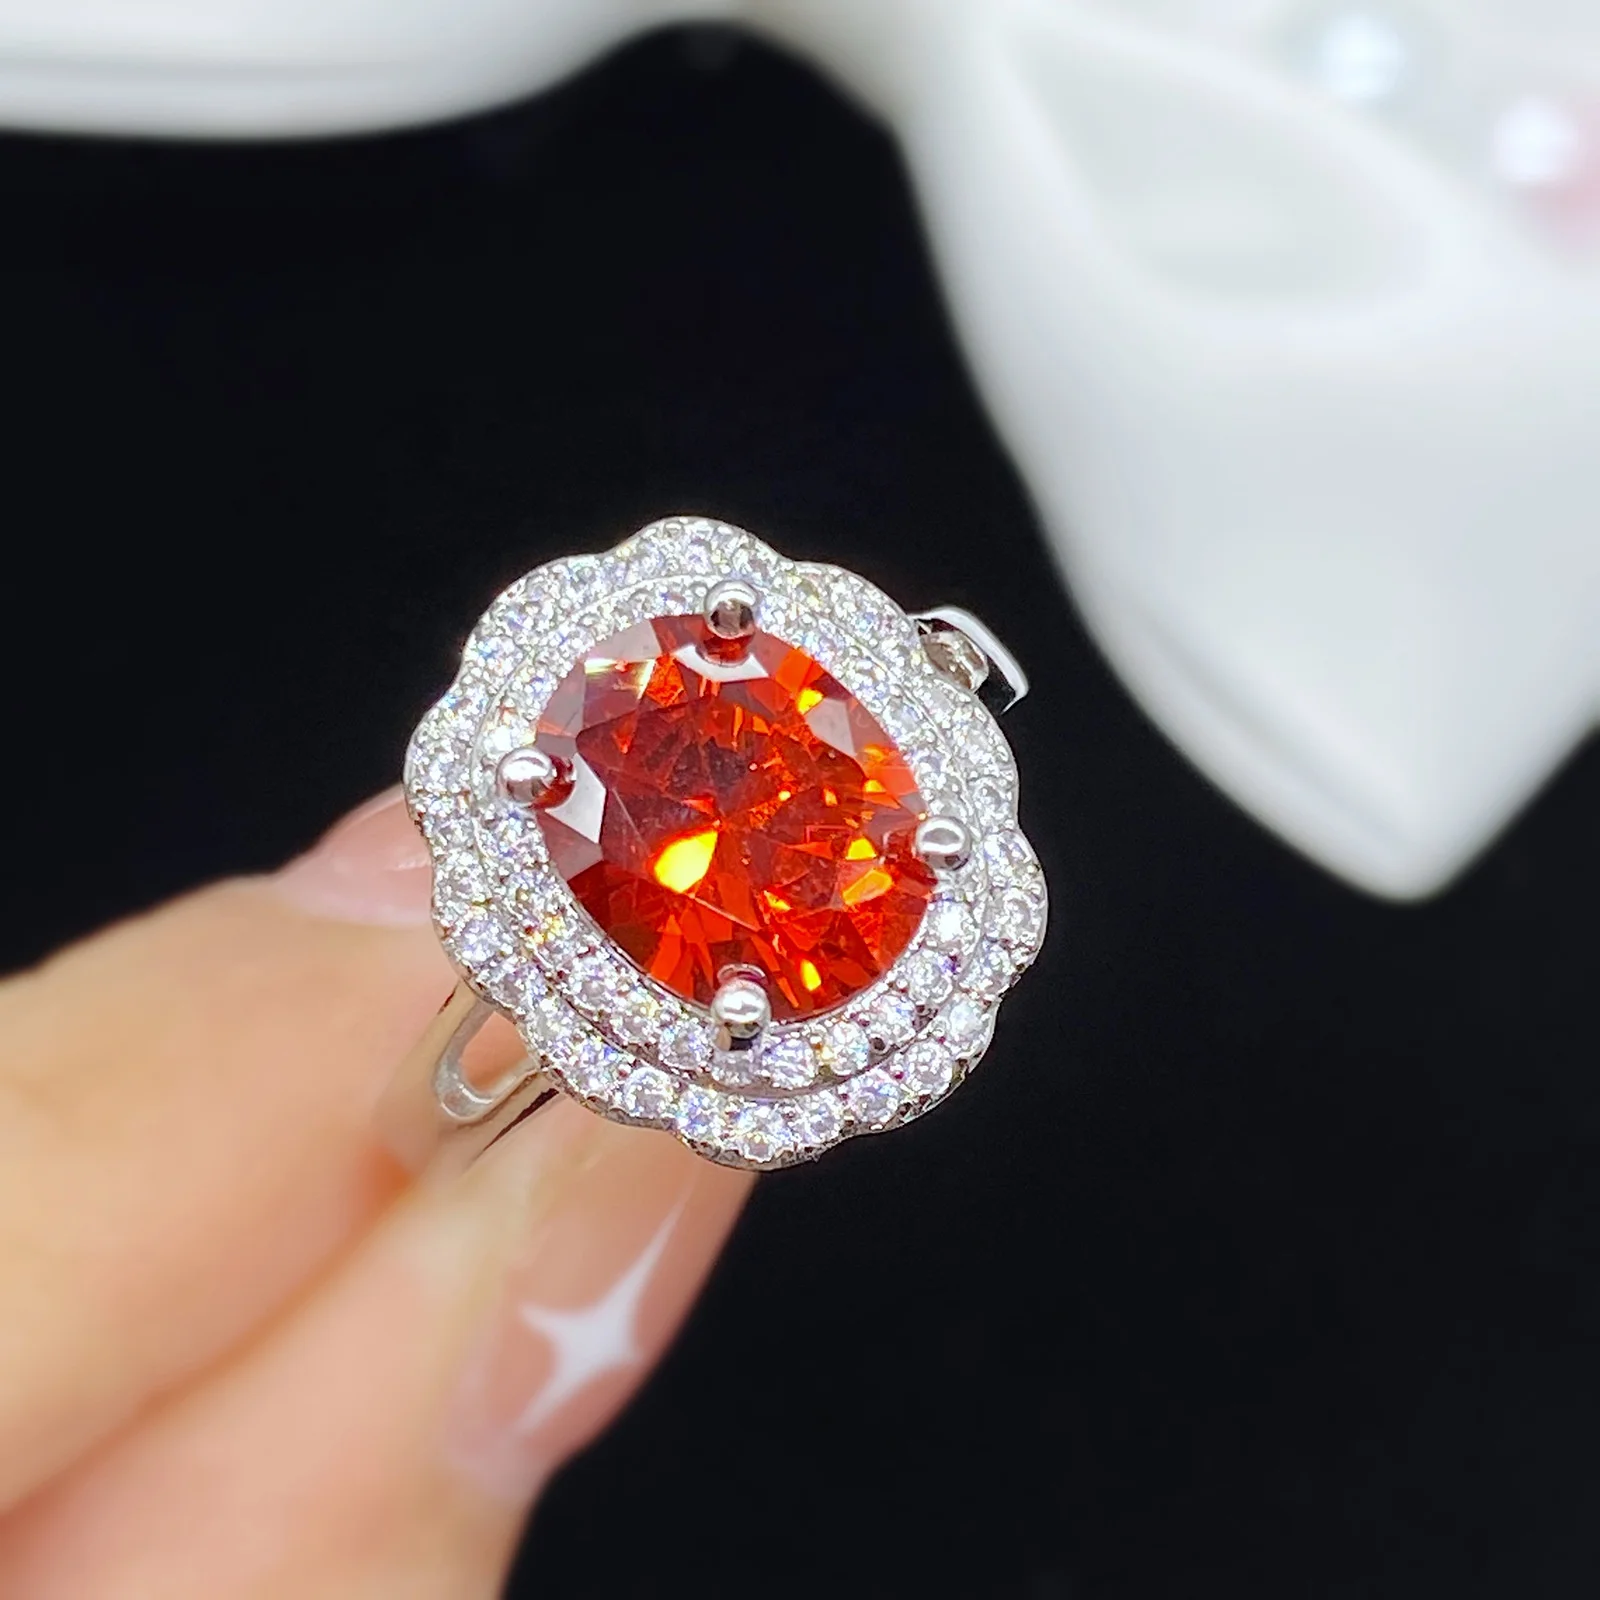 

Elegant Orange Red Gemstones Diamonds Rings for Women White Gold Silver Color Jewelry Bling Crystal Accessories, Picture shows